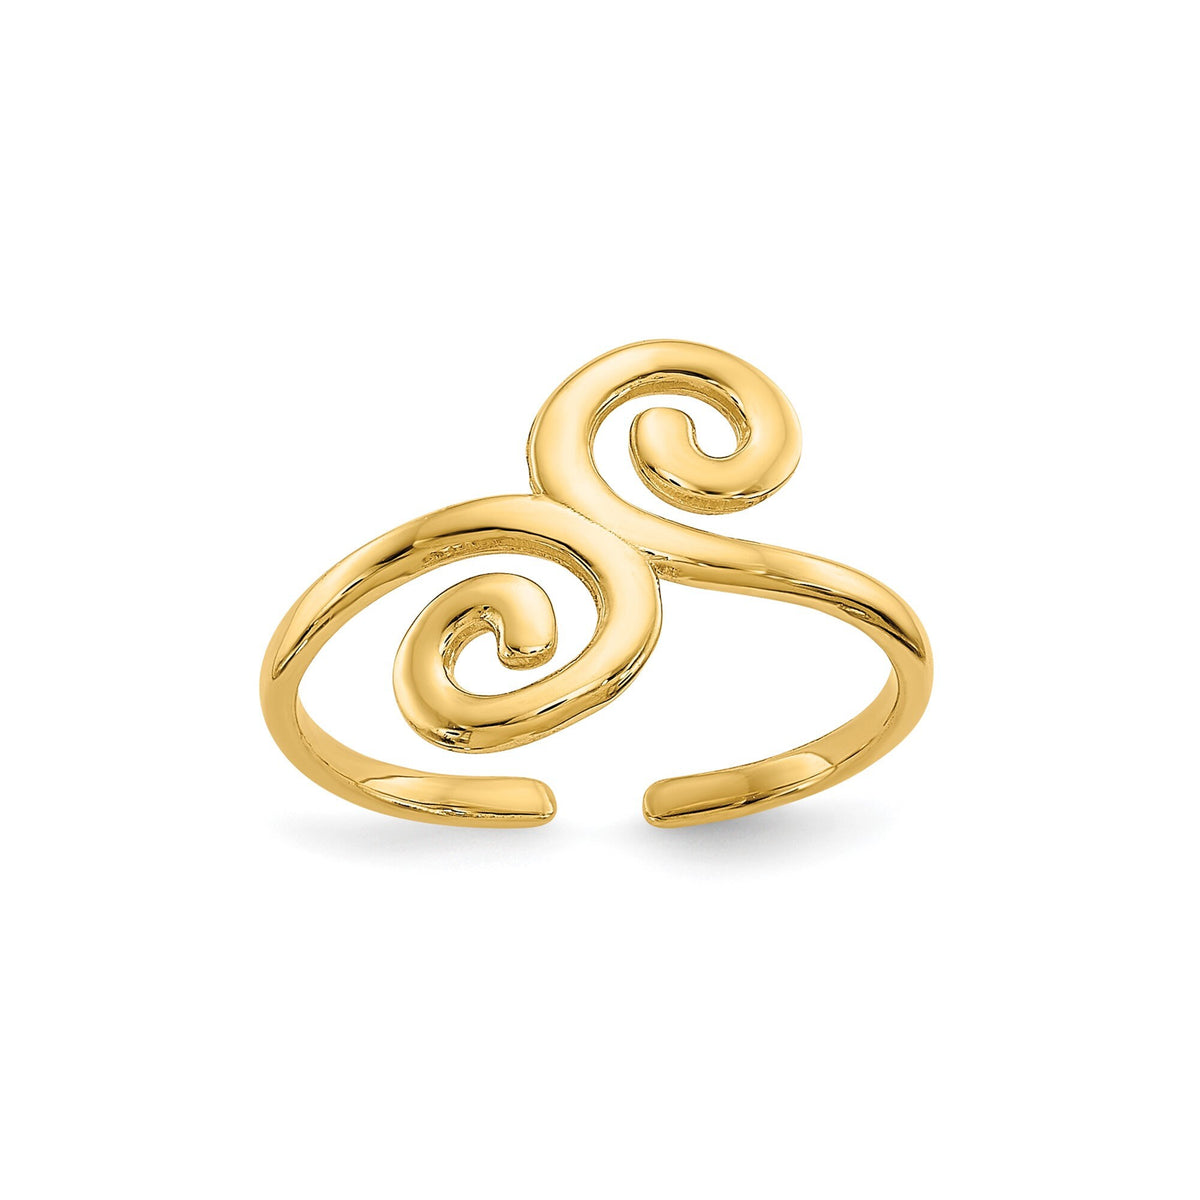 14k Yellow Gold Swirl Solid Toe Ring 4mm Band - Gift Box Included - Made in USA